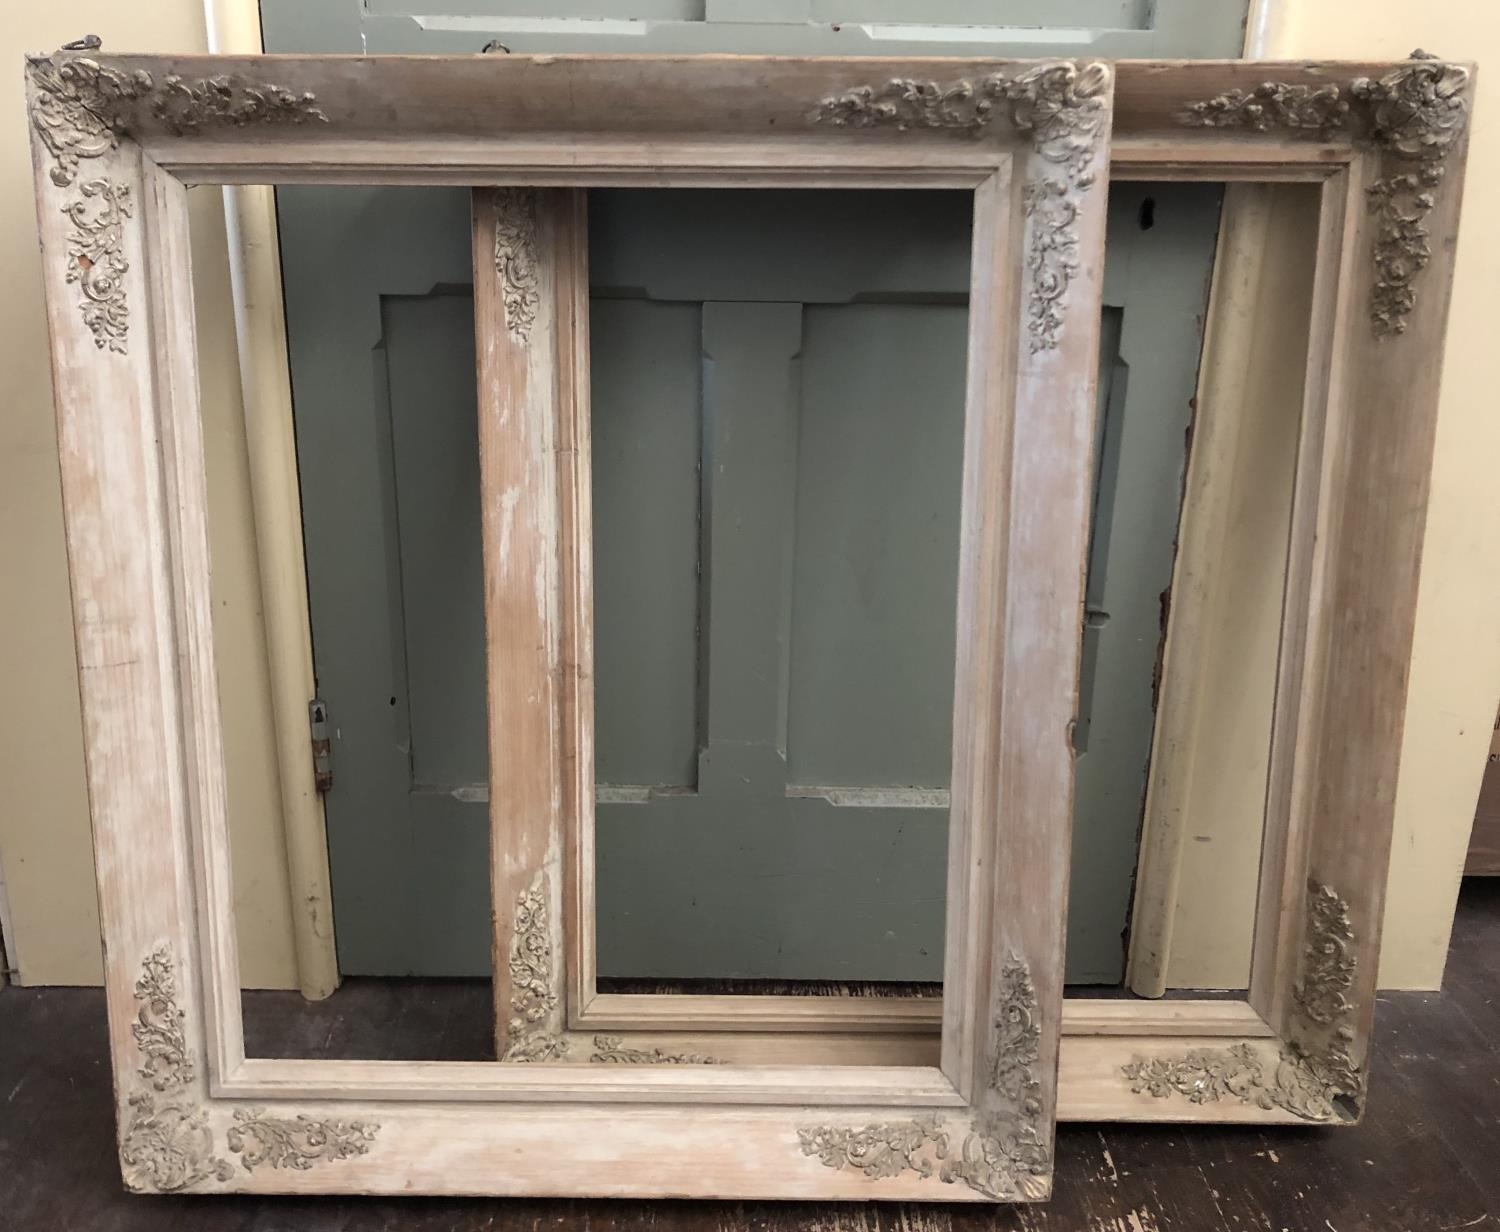 A pair of 19th century wooden frames with washed finish and moulded floral decorations to each